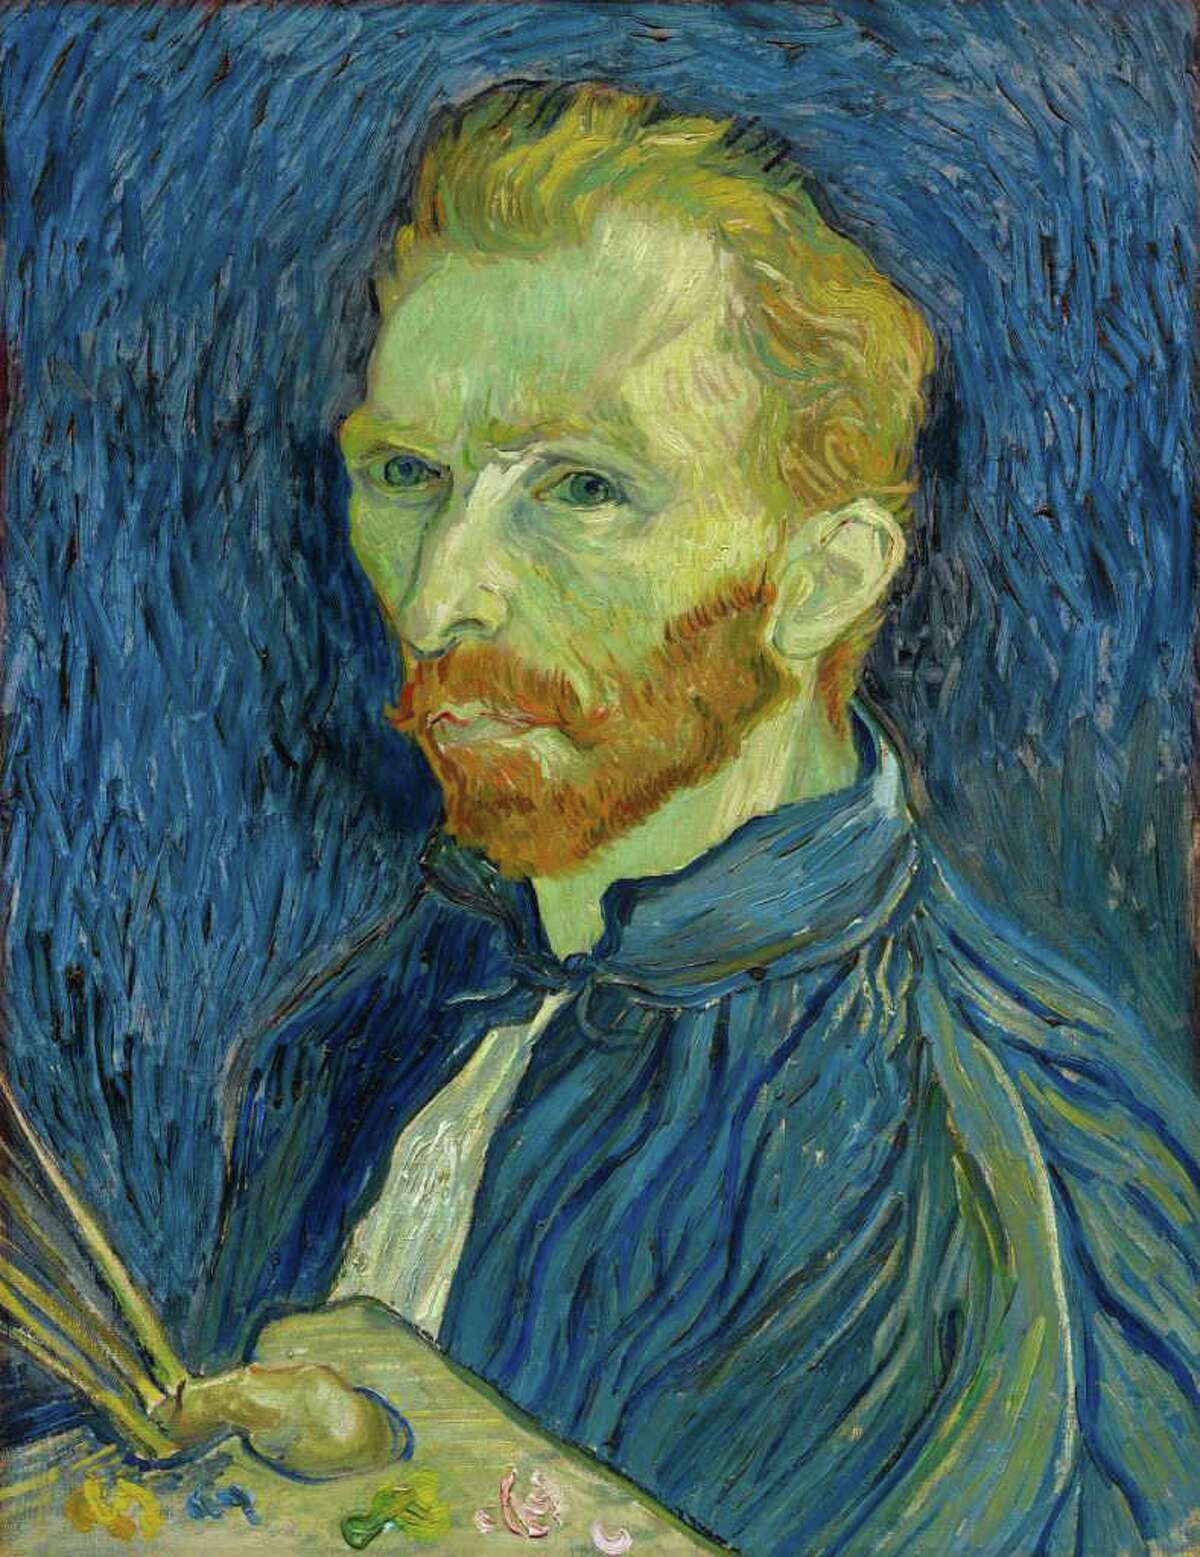 Vincent van Gogh, Dutch, 1853-1890 Self-Portrait 1889 Oil on canvas The National Gallery of Art, Washington, D.C., Collection of Mr. and Mrs. John Hay Whitney, 1998.74.5